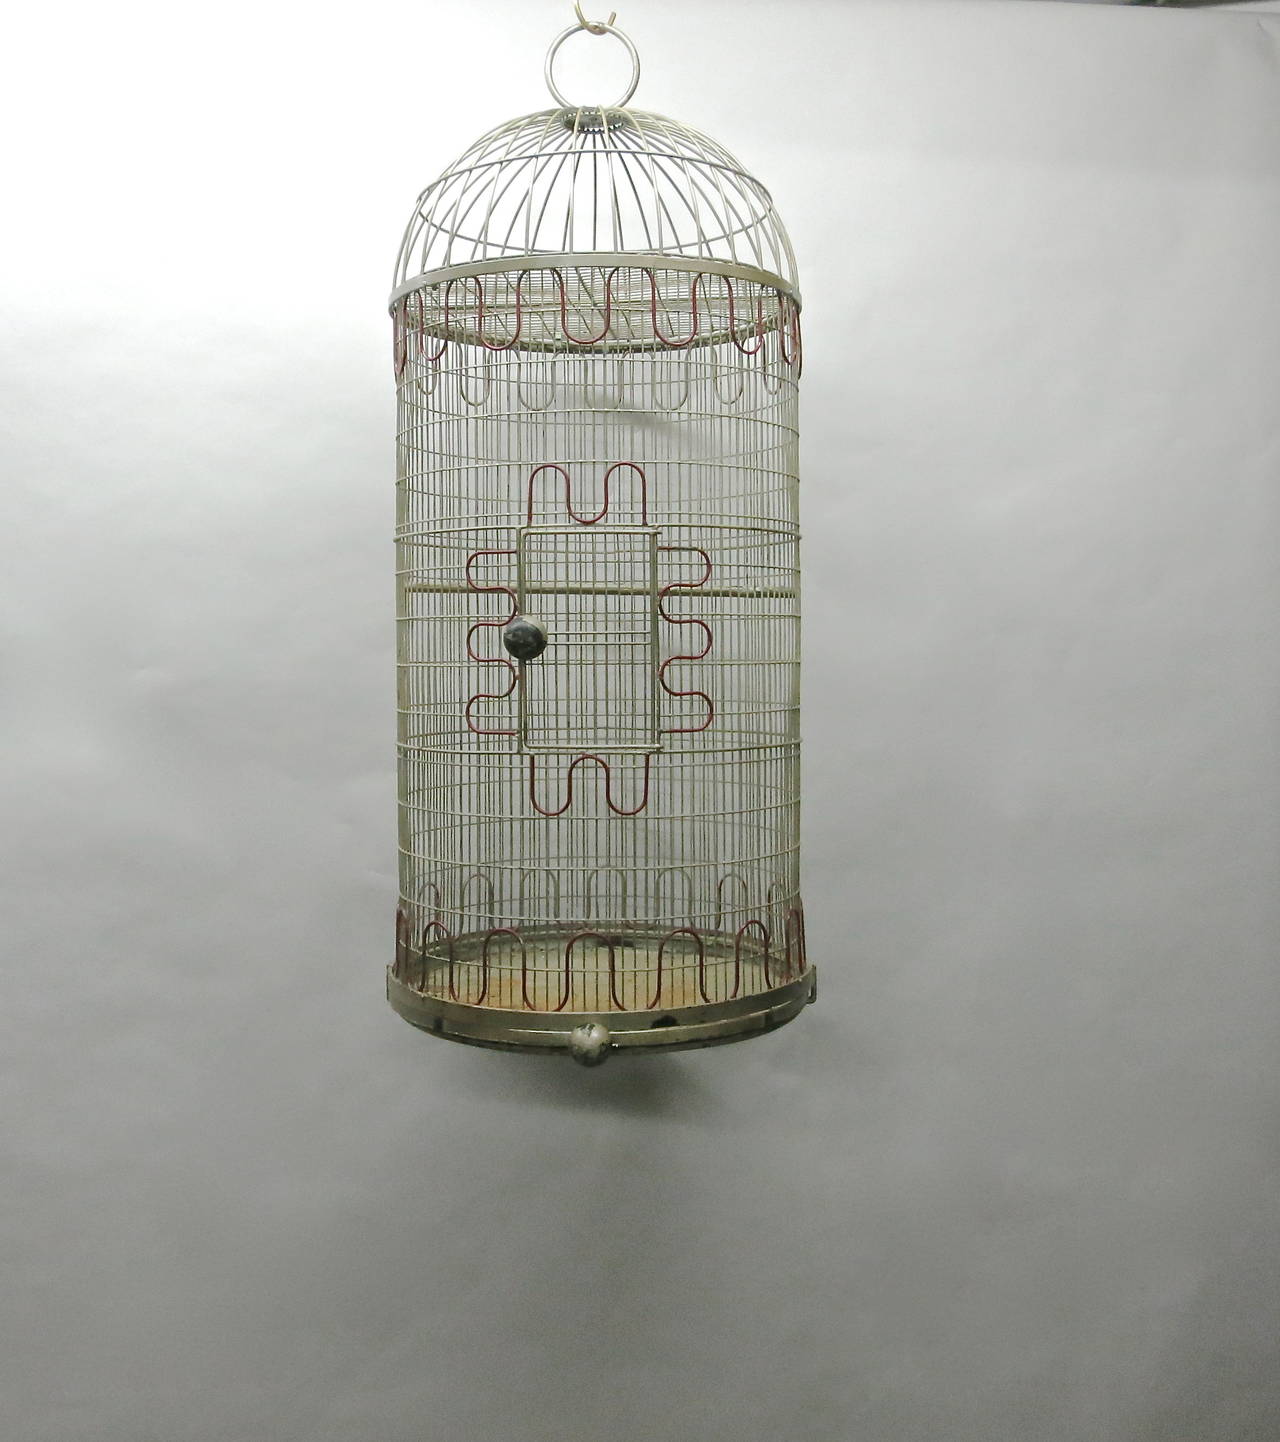 Bird Cage in original condition made of enameled metal with red detail of inverted arches in three places, just above the tray around the door and just bellow the dome top. Both the dome top and the tray are removable. The door and the bottom tray